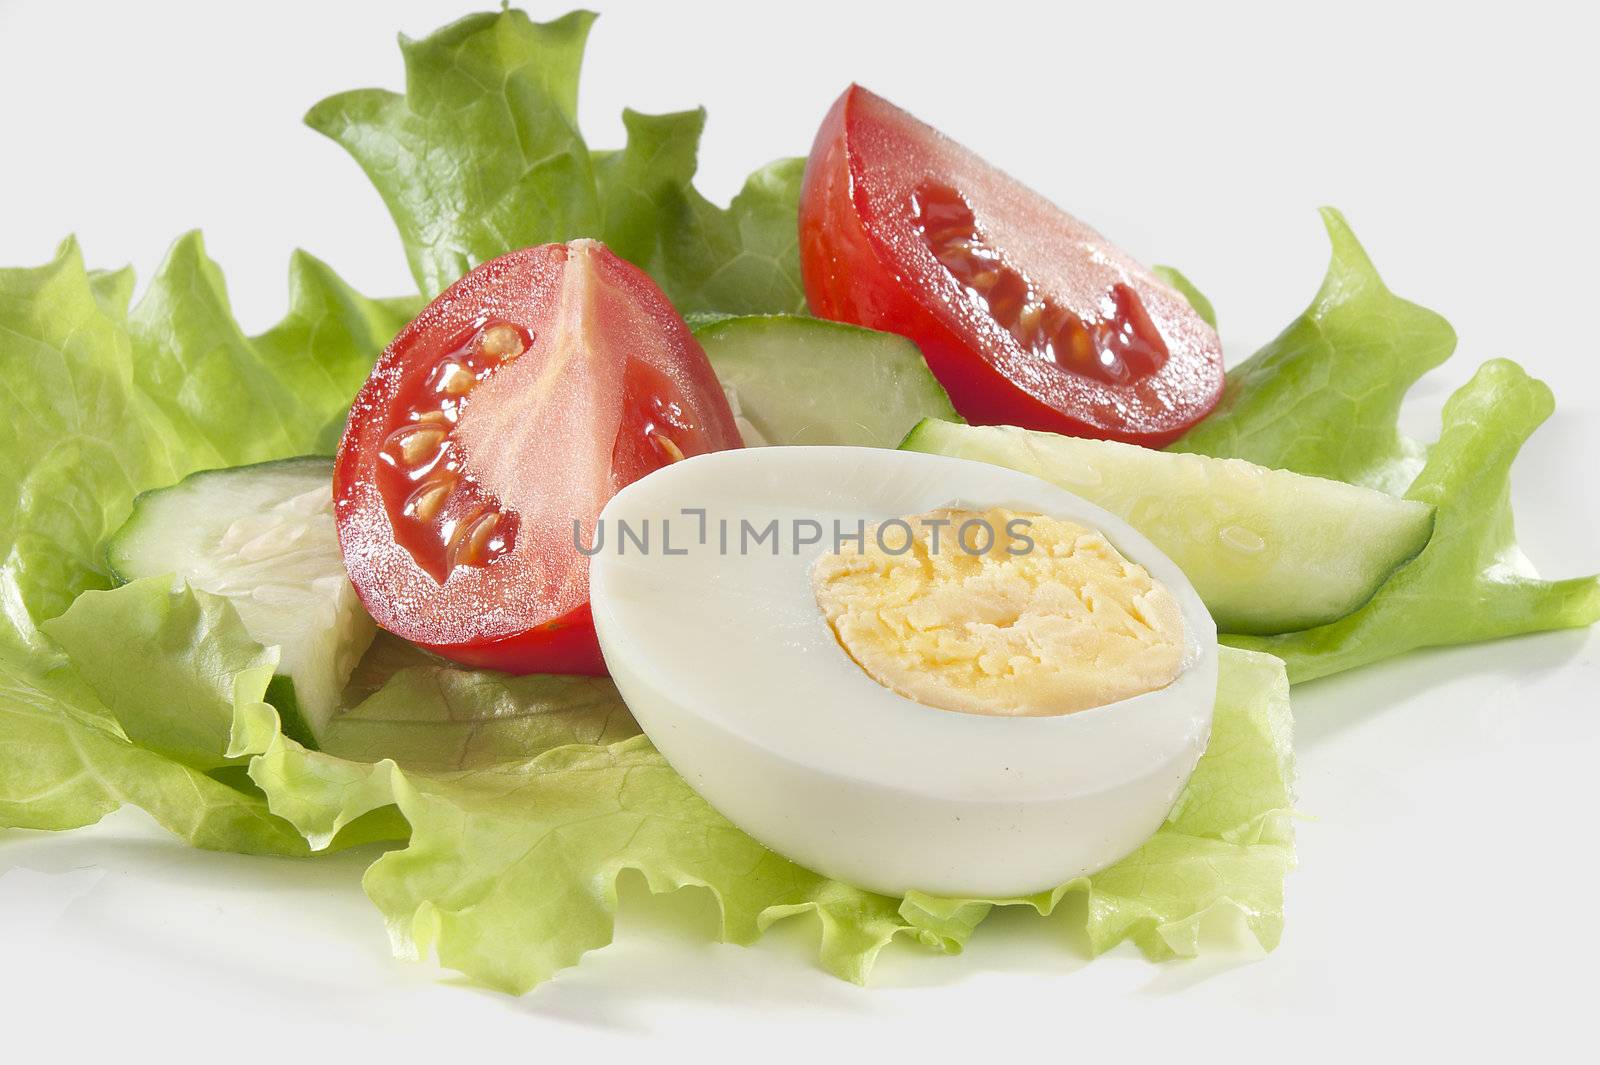 Half of boiled egg with vegetables on the lettuce